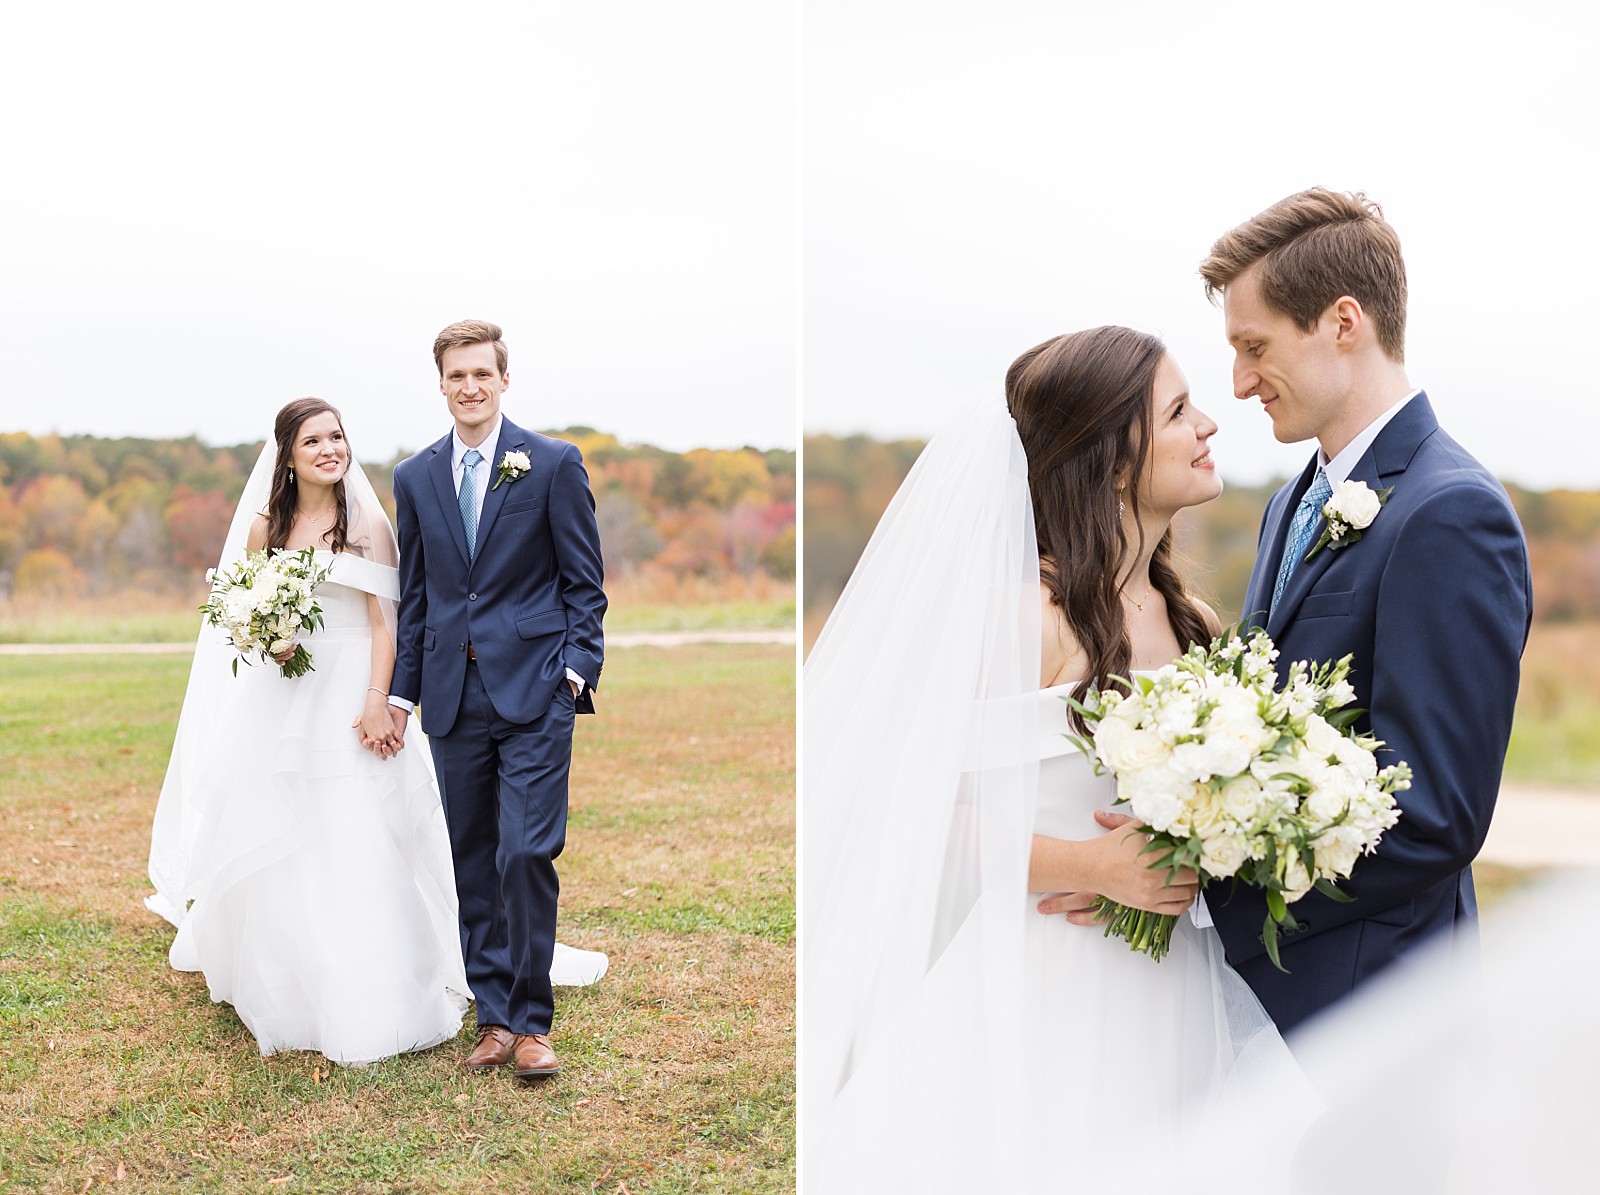 Bride and groom | Fall Wedding at The Meadows in Raleigh | Raleigh NC Wedding Photographer